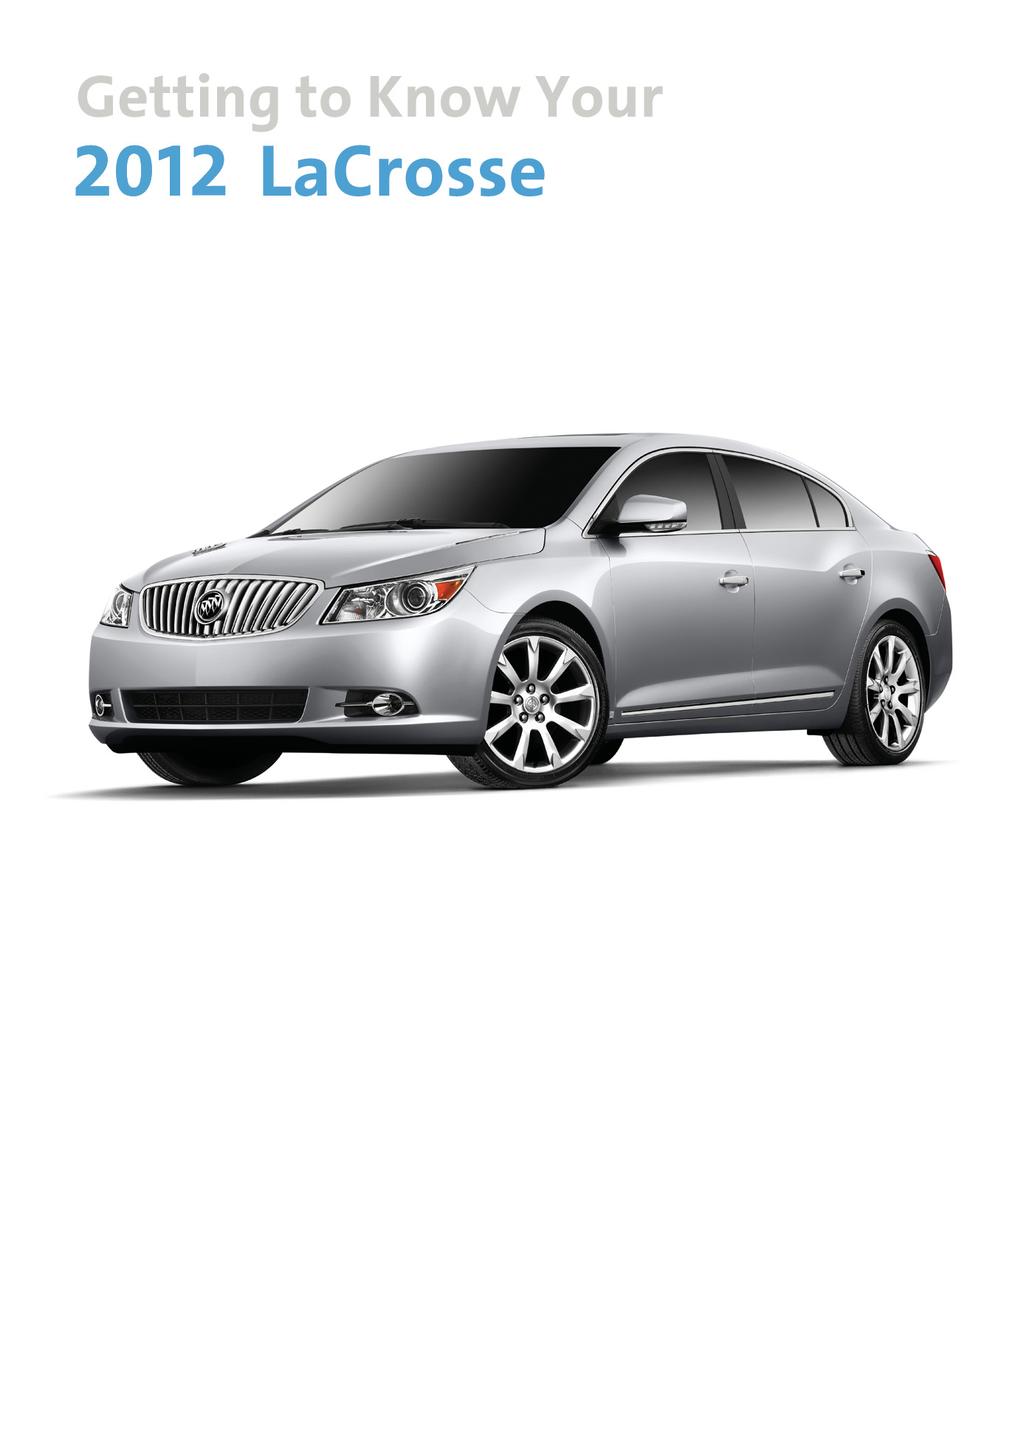 Review this Quick Reference Guide for an overview of some important features in your Buick LaCrosse. More detailed information can be found in your Owner Manual.